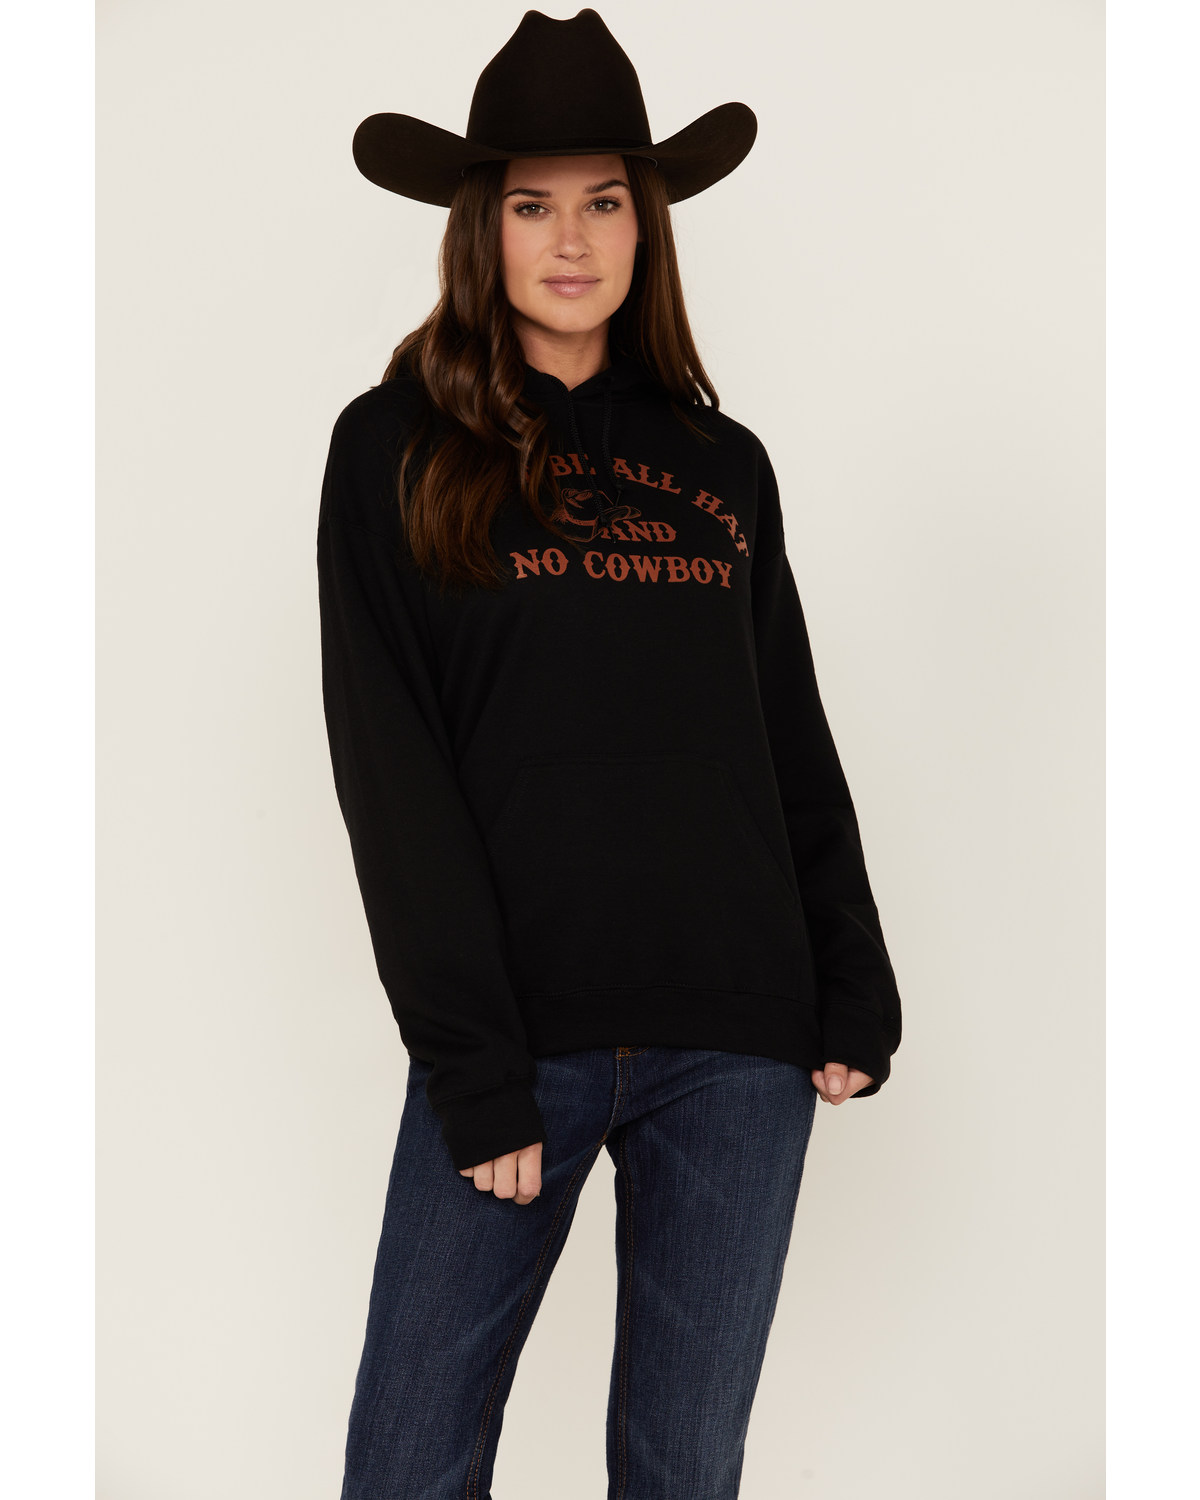 Goodie Two Sleeves Women's Don't Be All Hat & No Cowboy Black Graphic Hoodie